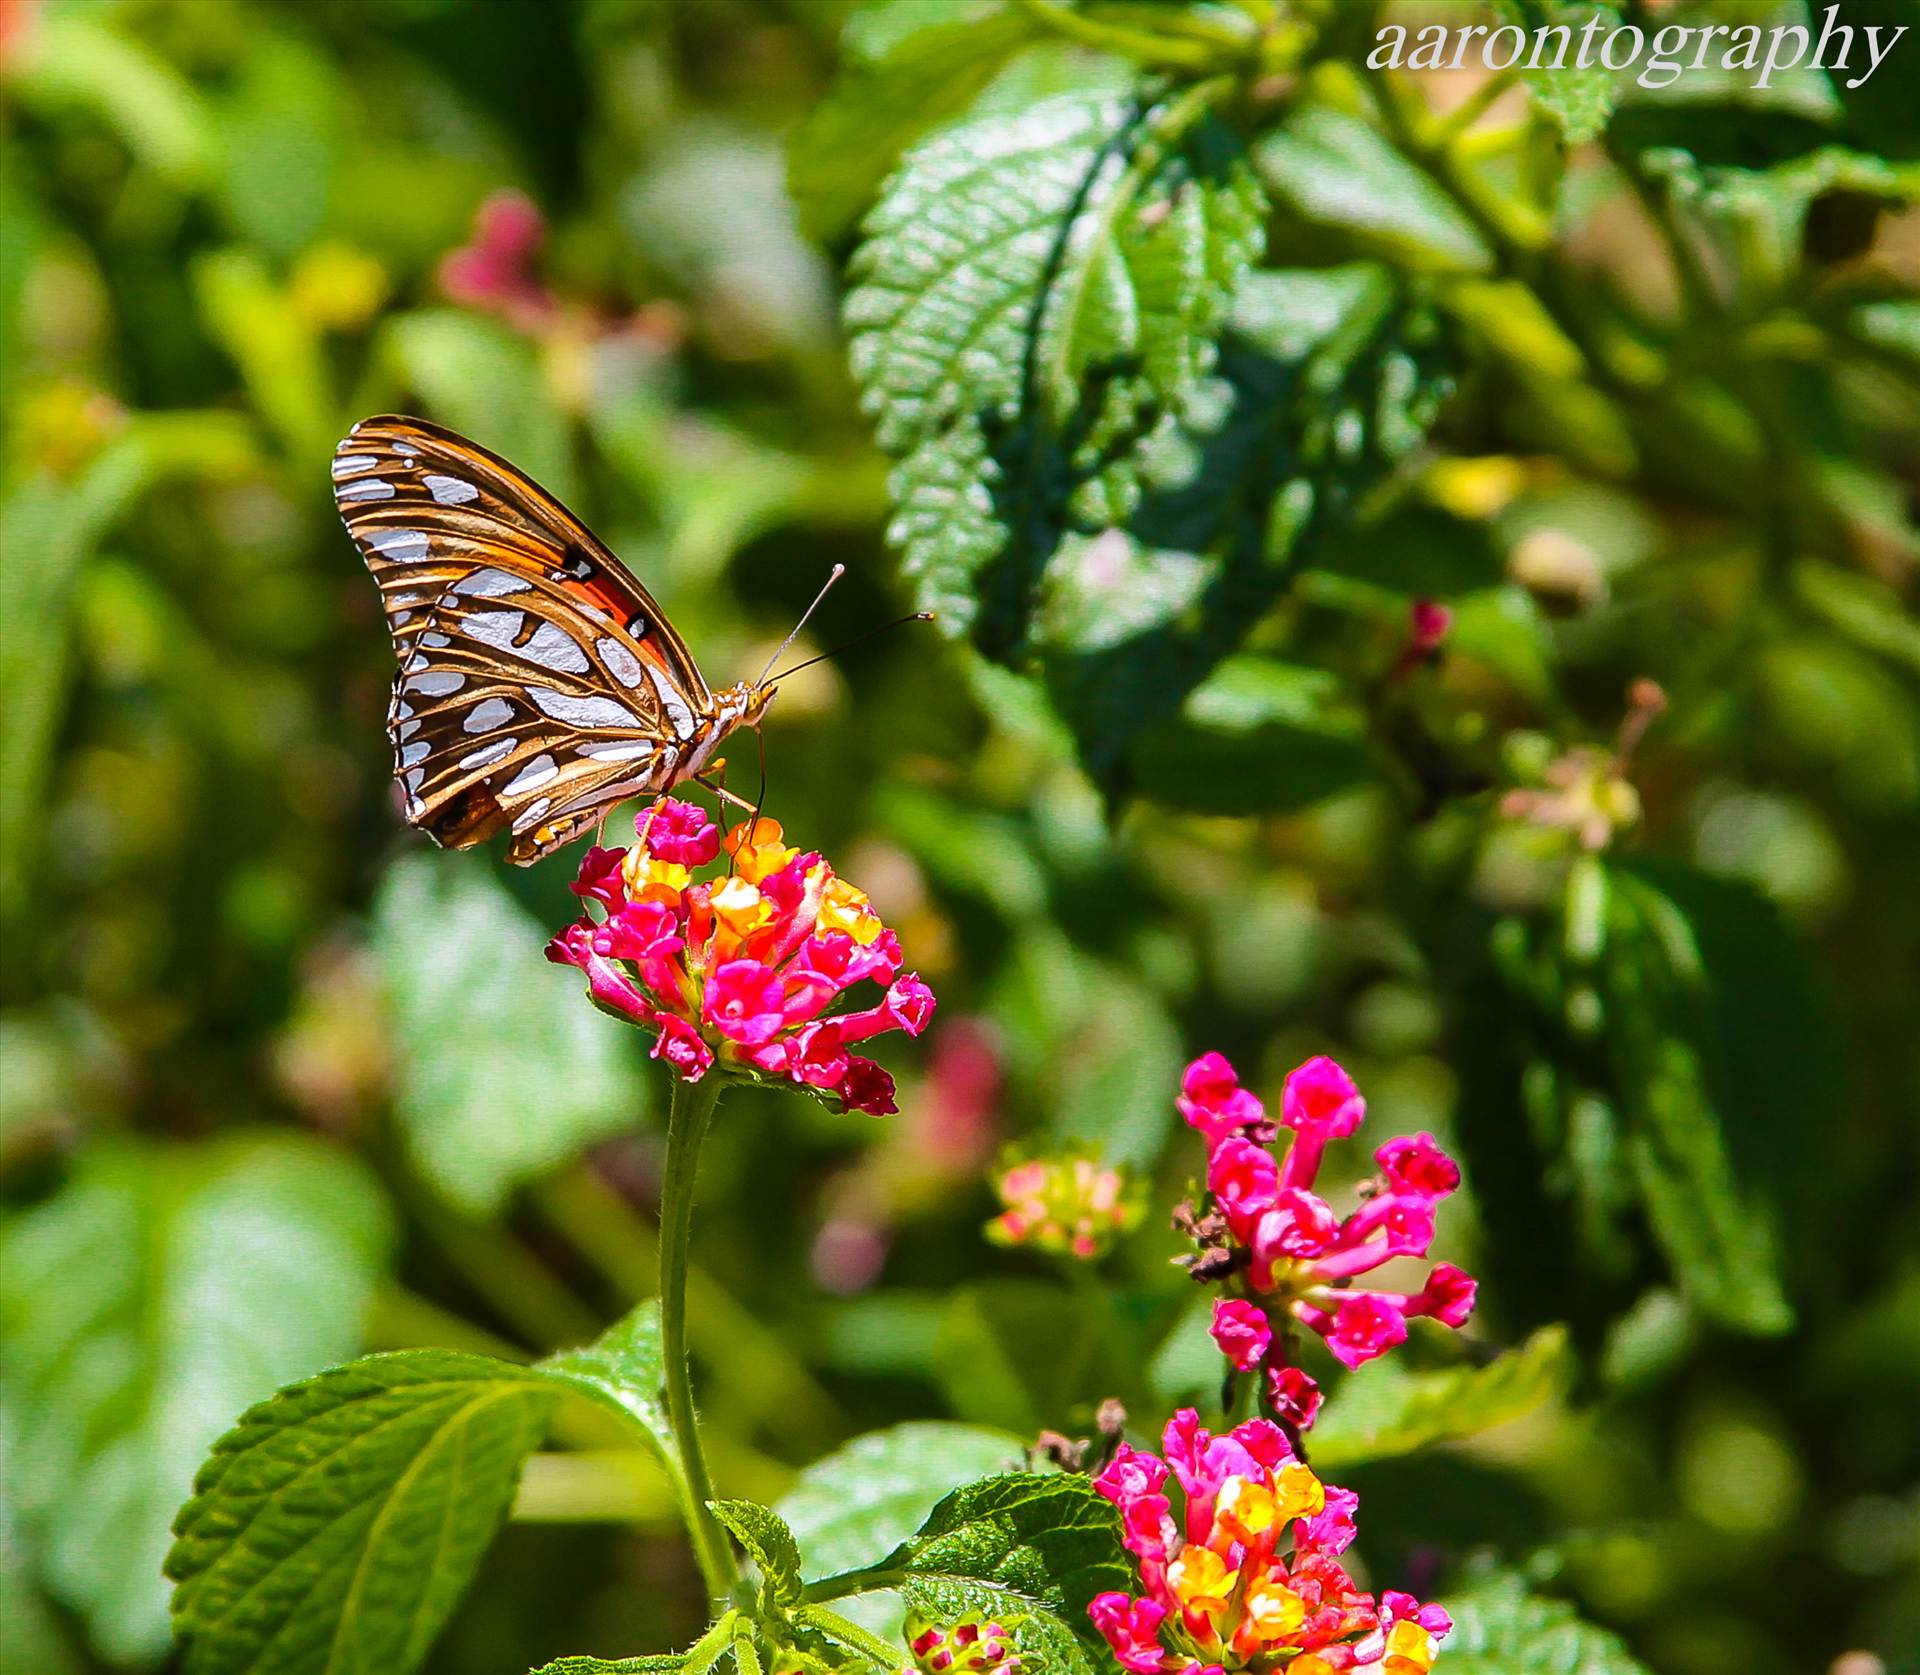 Butterfly and green.jpg undefined by Aaron